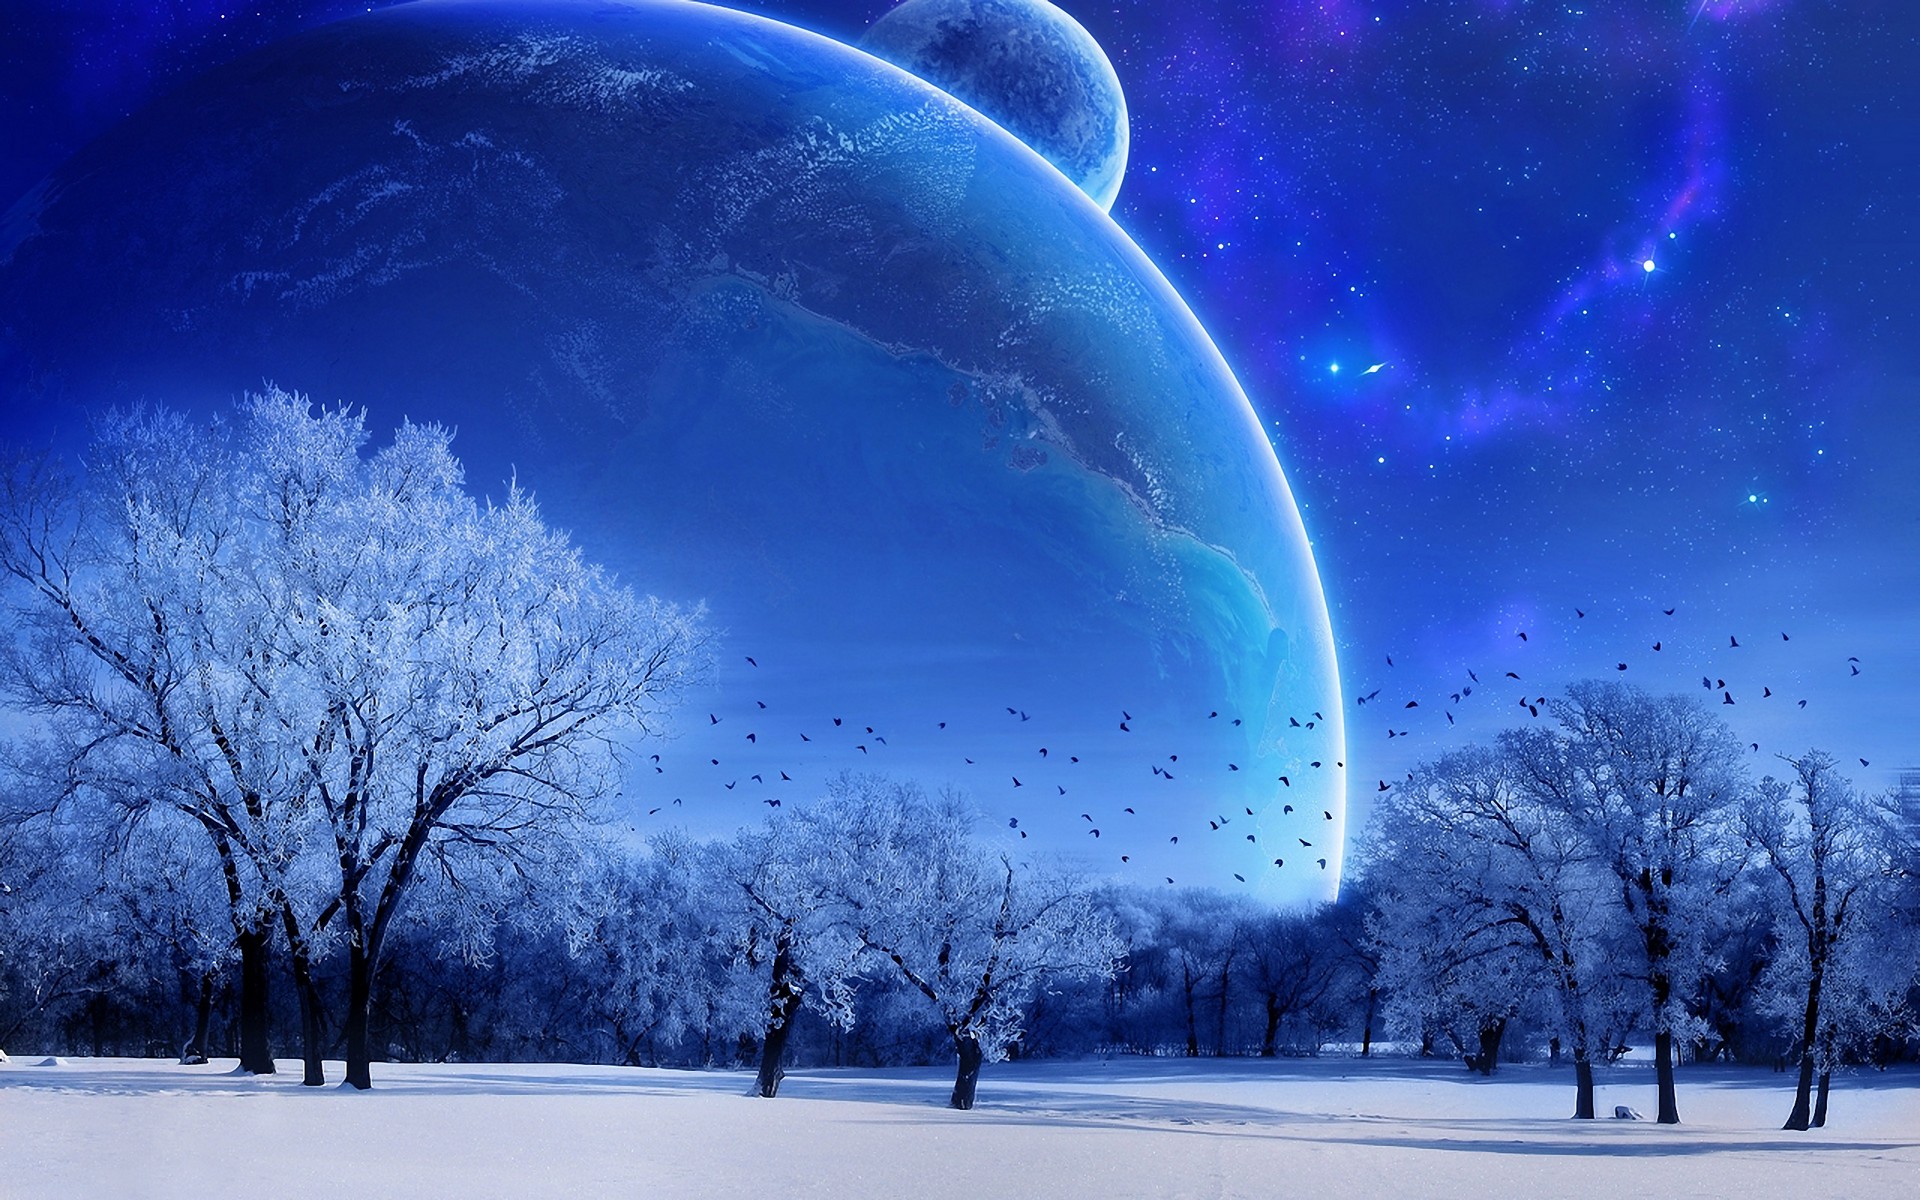  and Planets Google Wallpapers Snow and Planets Google Backgrounds